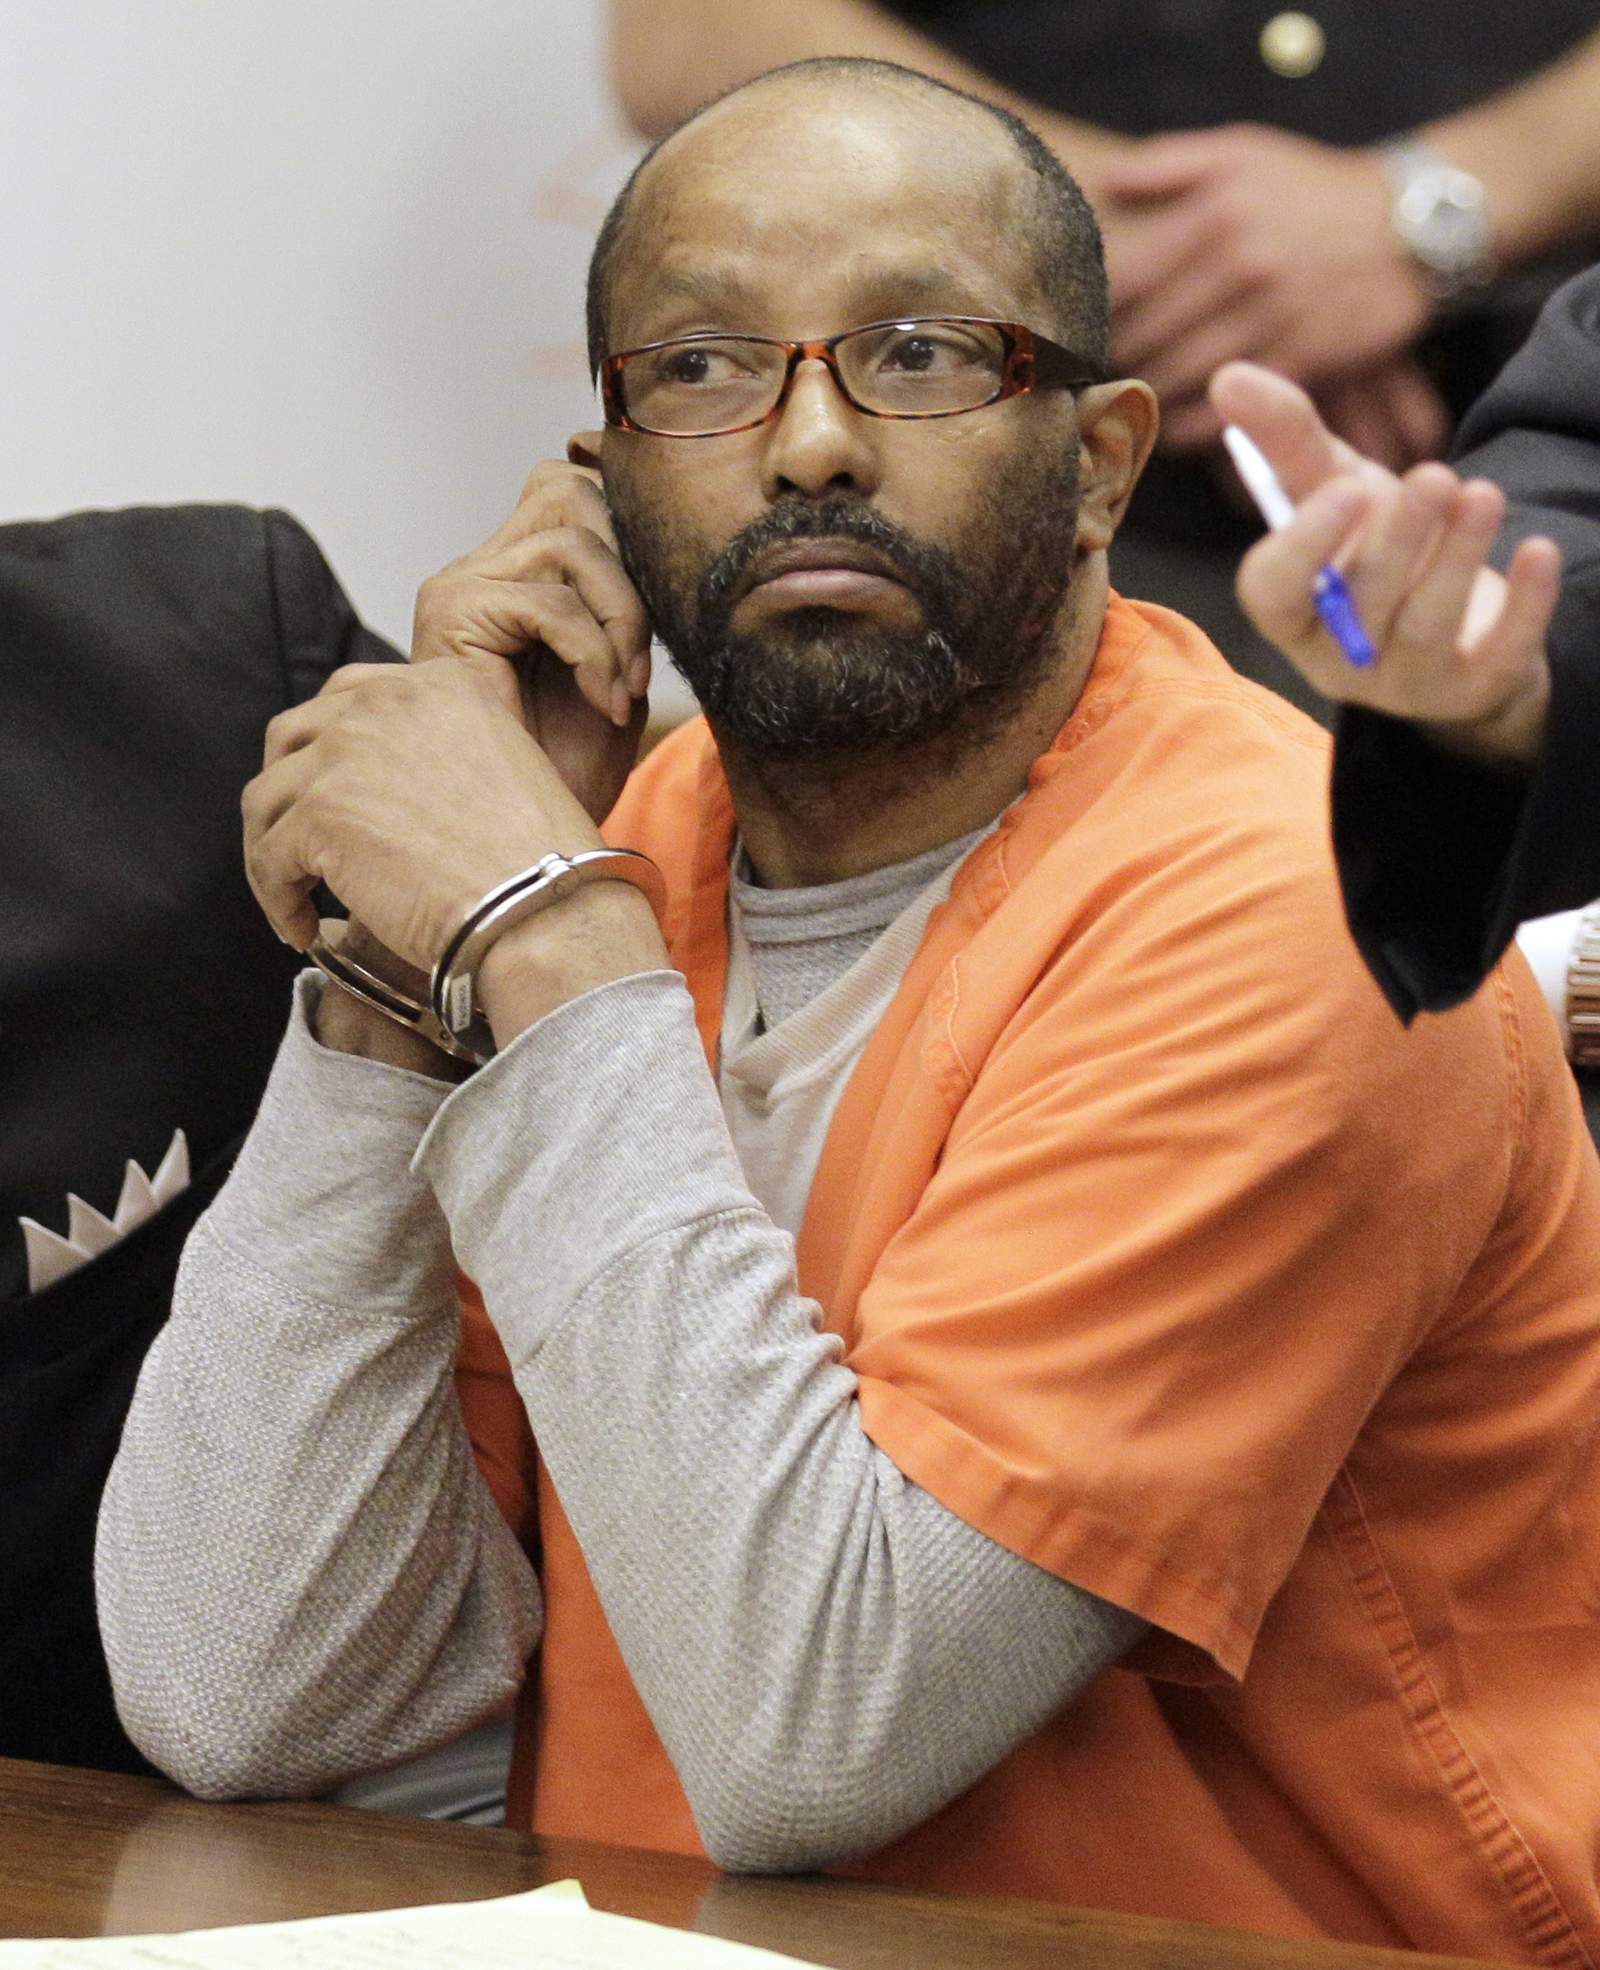 Anthony Sowell, Ohio man who killed 11 women, dies in prison